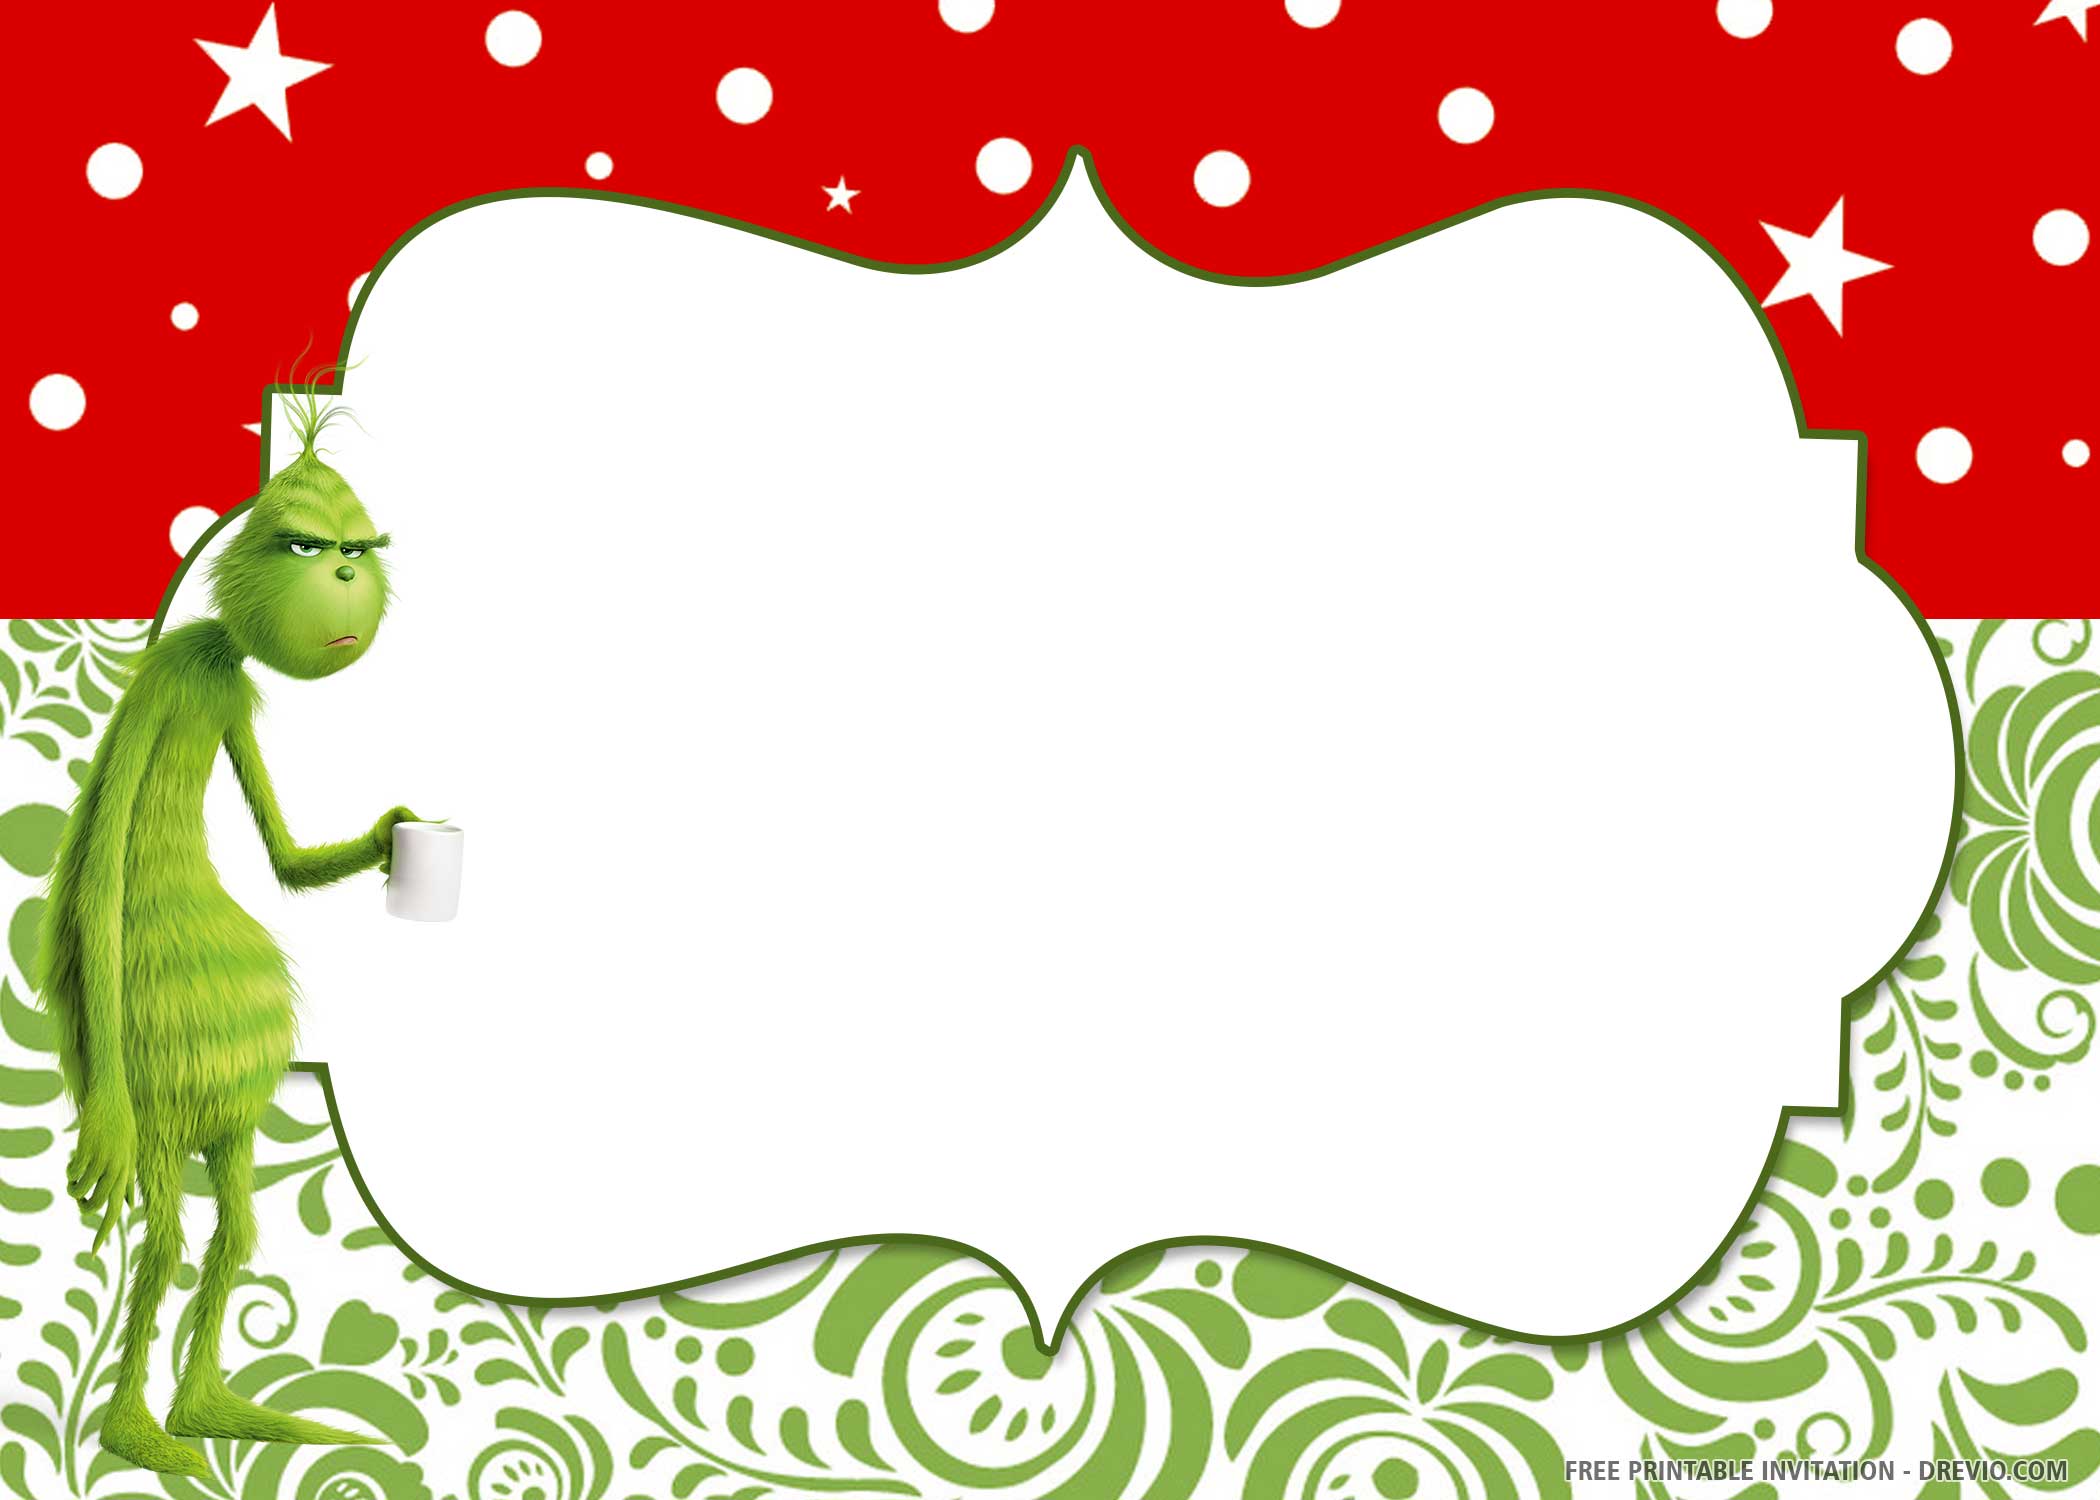 We offer you special free printable Grinch birthday invitation templates. 